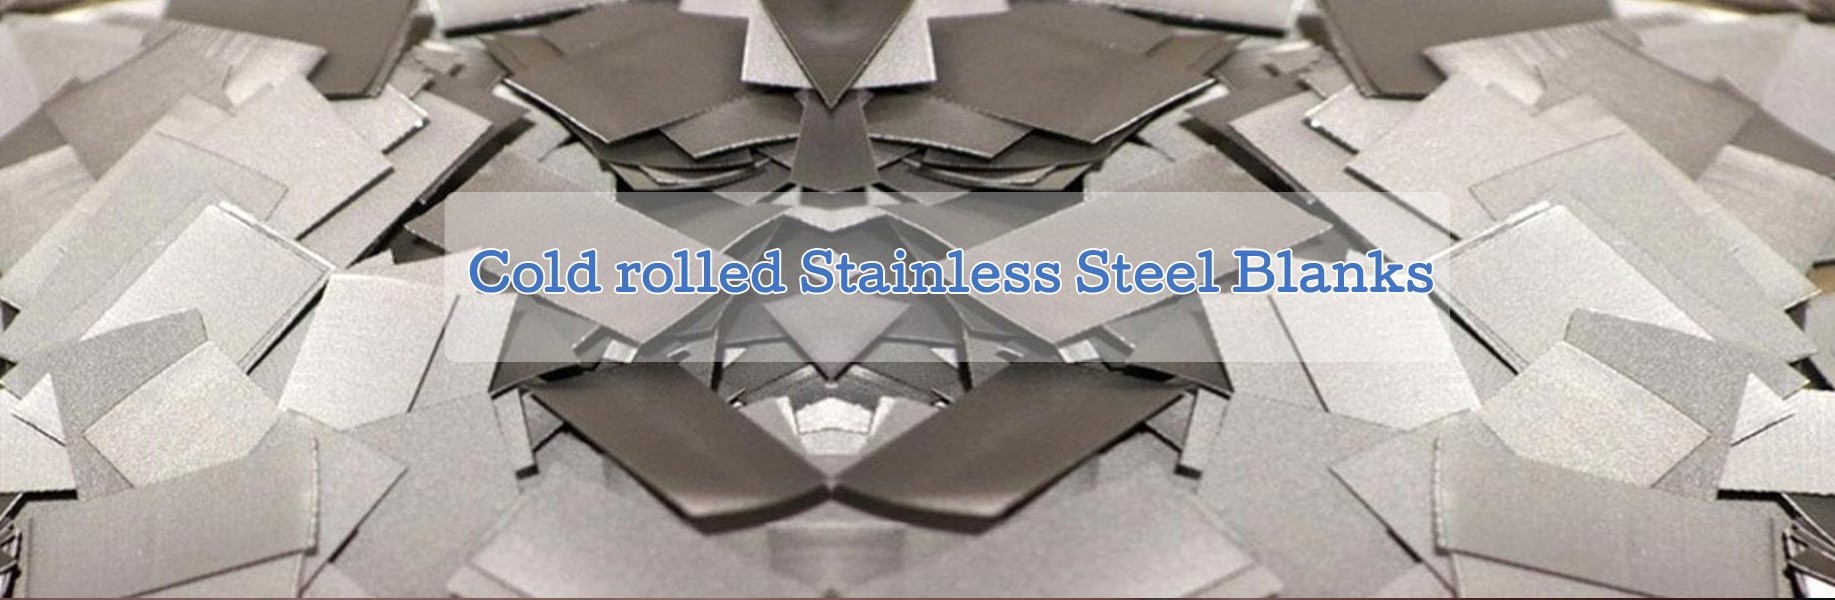 COLD ROLLED STAINLESS STEEL BLANKS